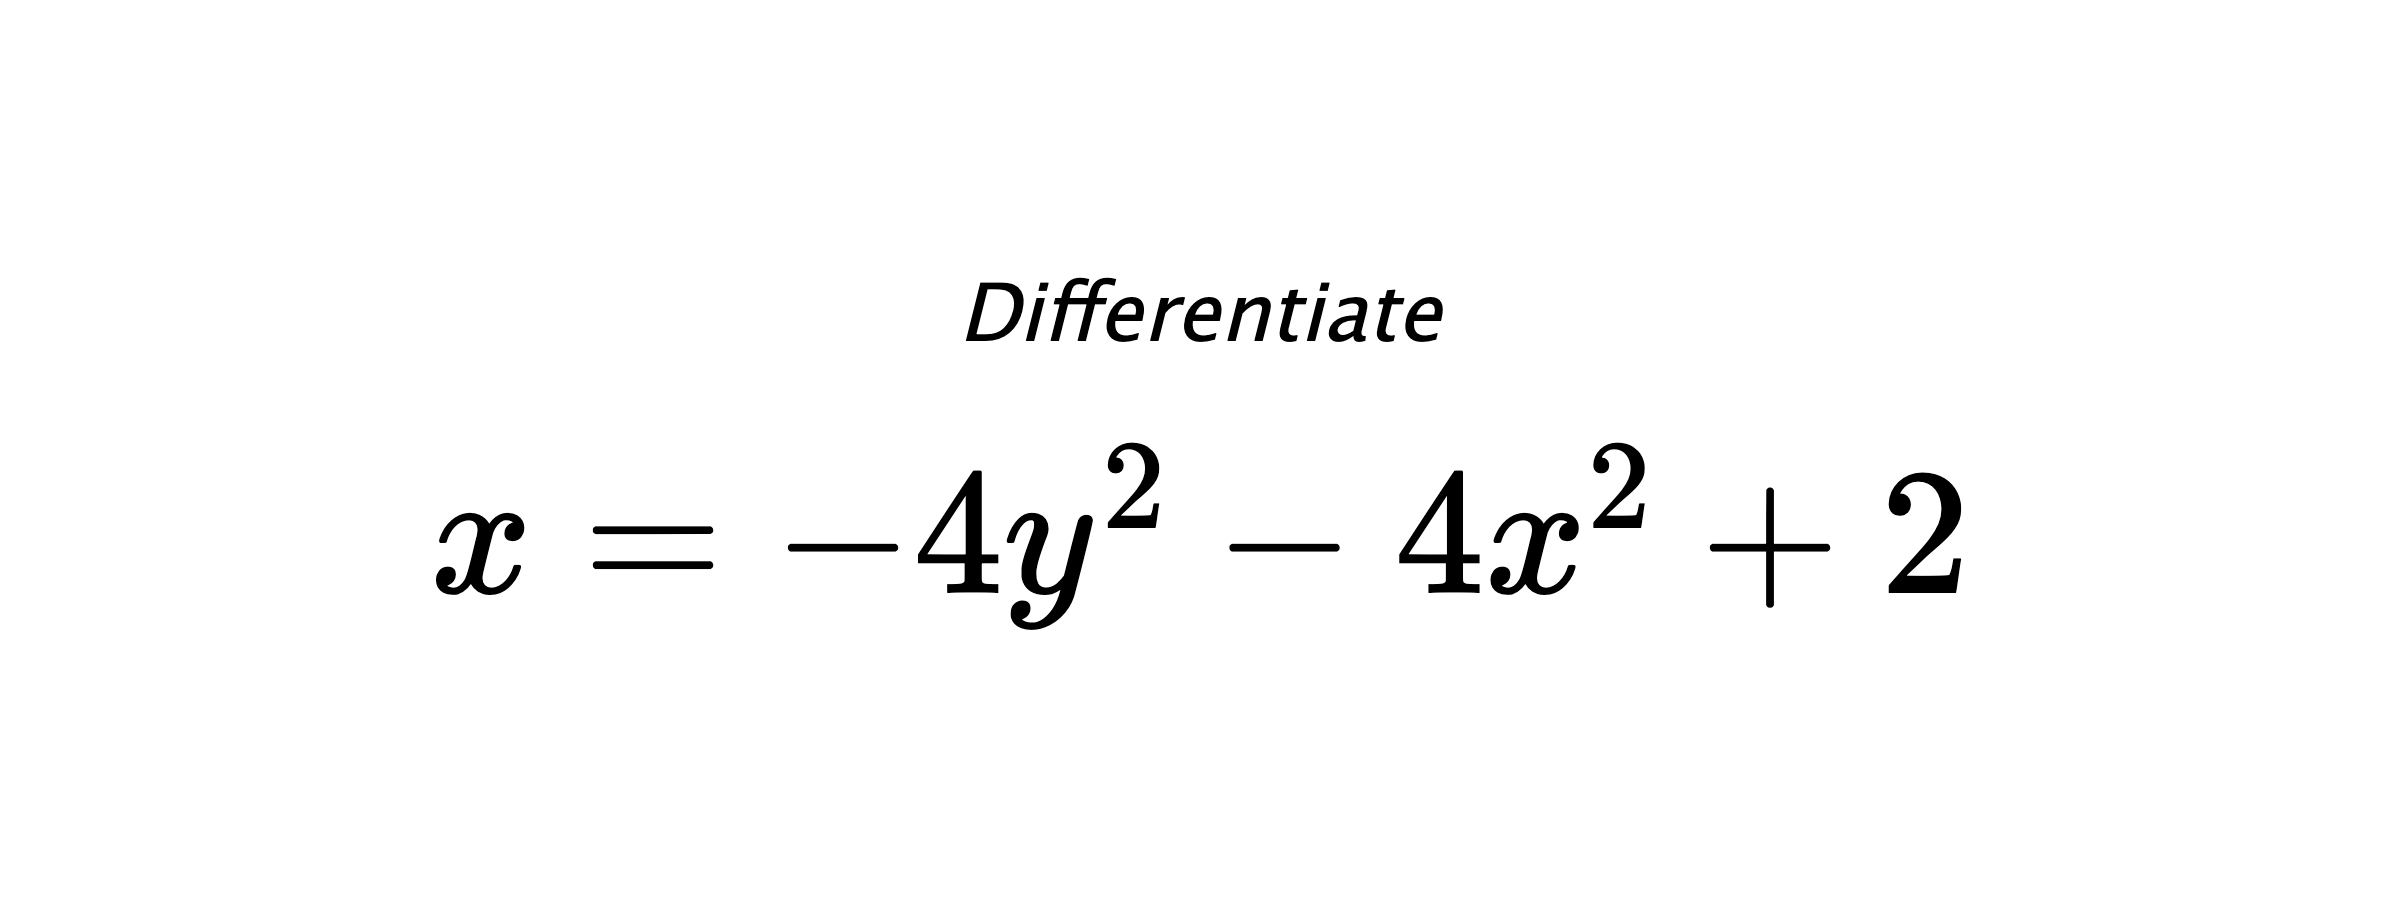 Differentiate $ x = -4y^2-4x^2+2 $